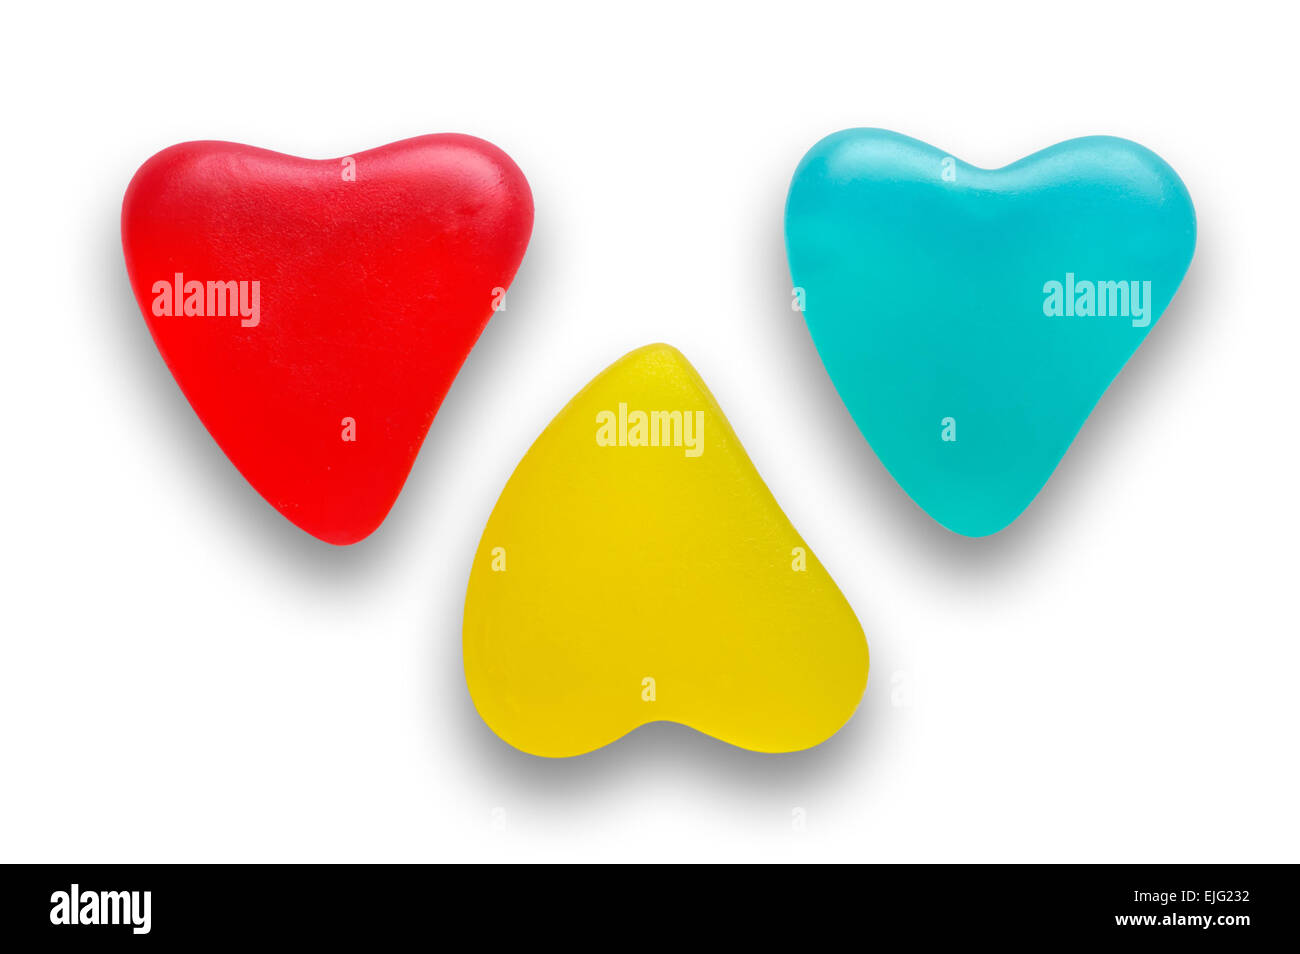 Heart shaped colored candies closeup Stock Photo